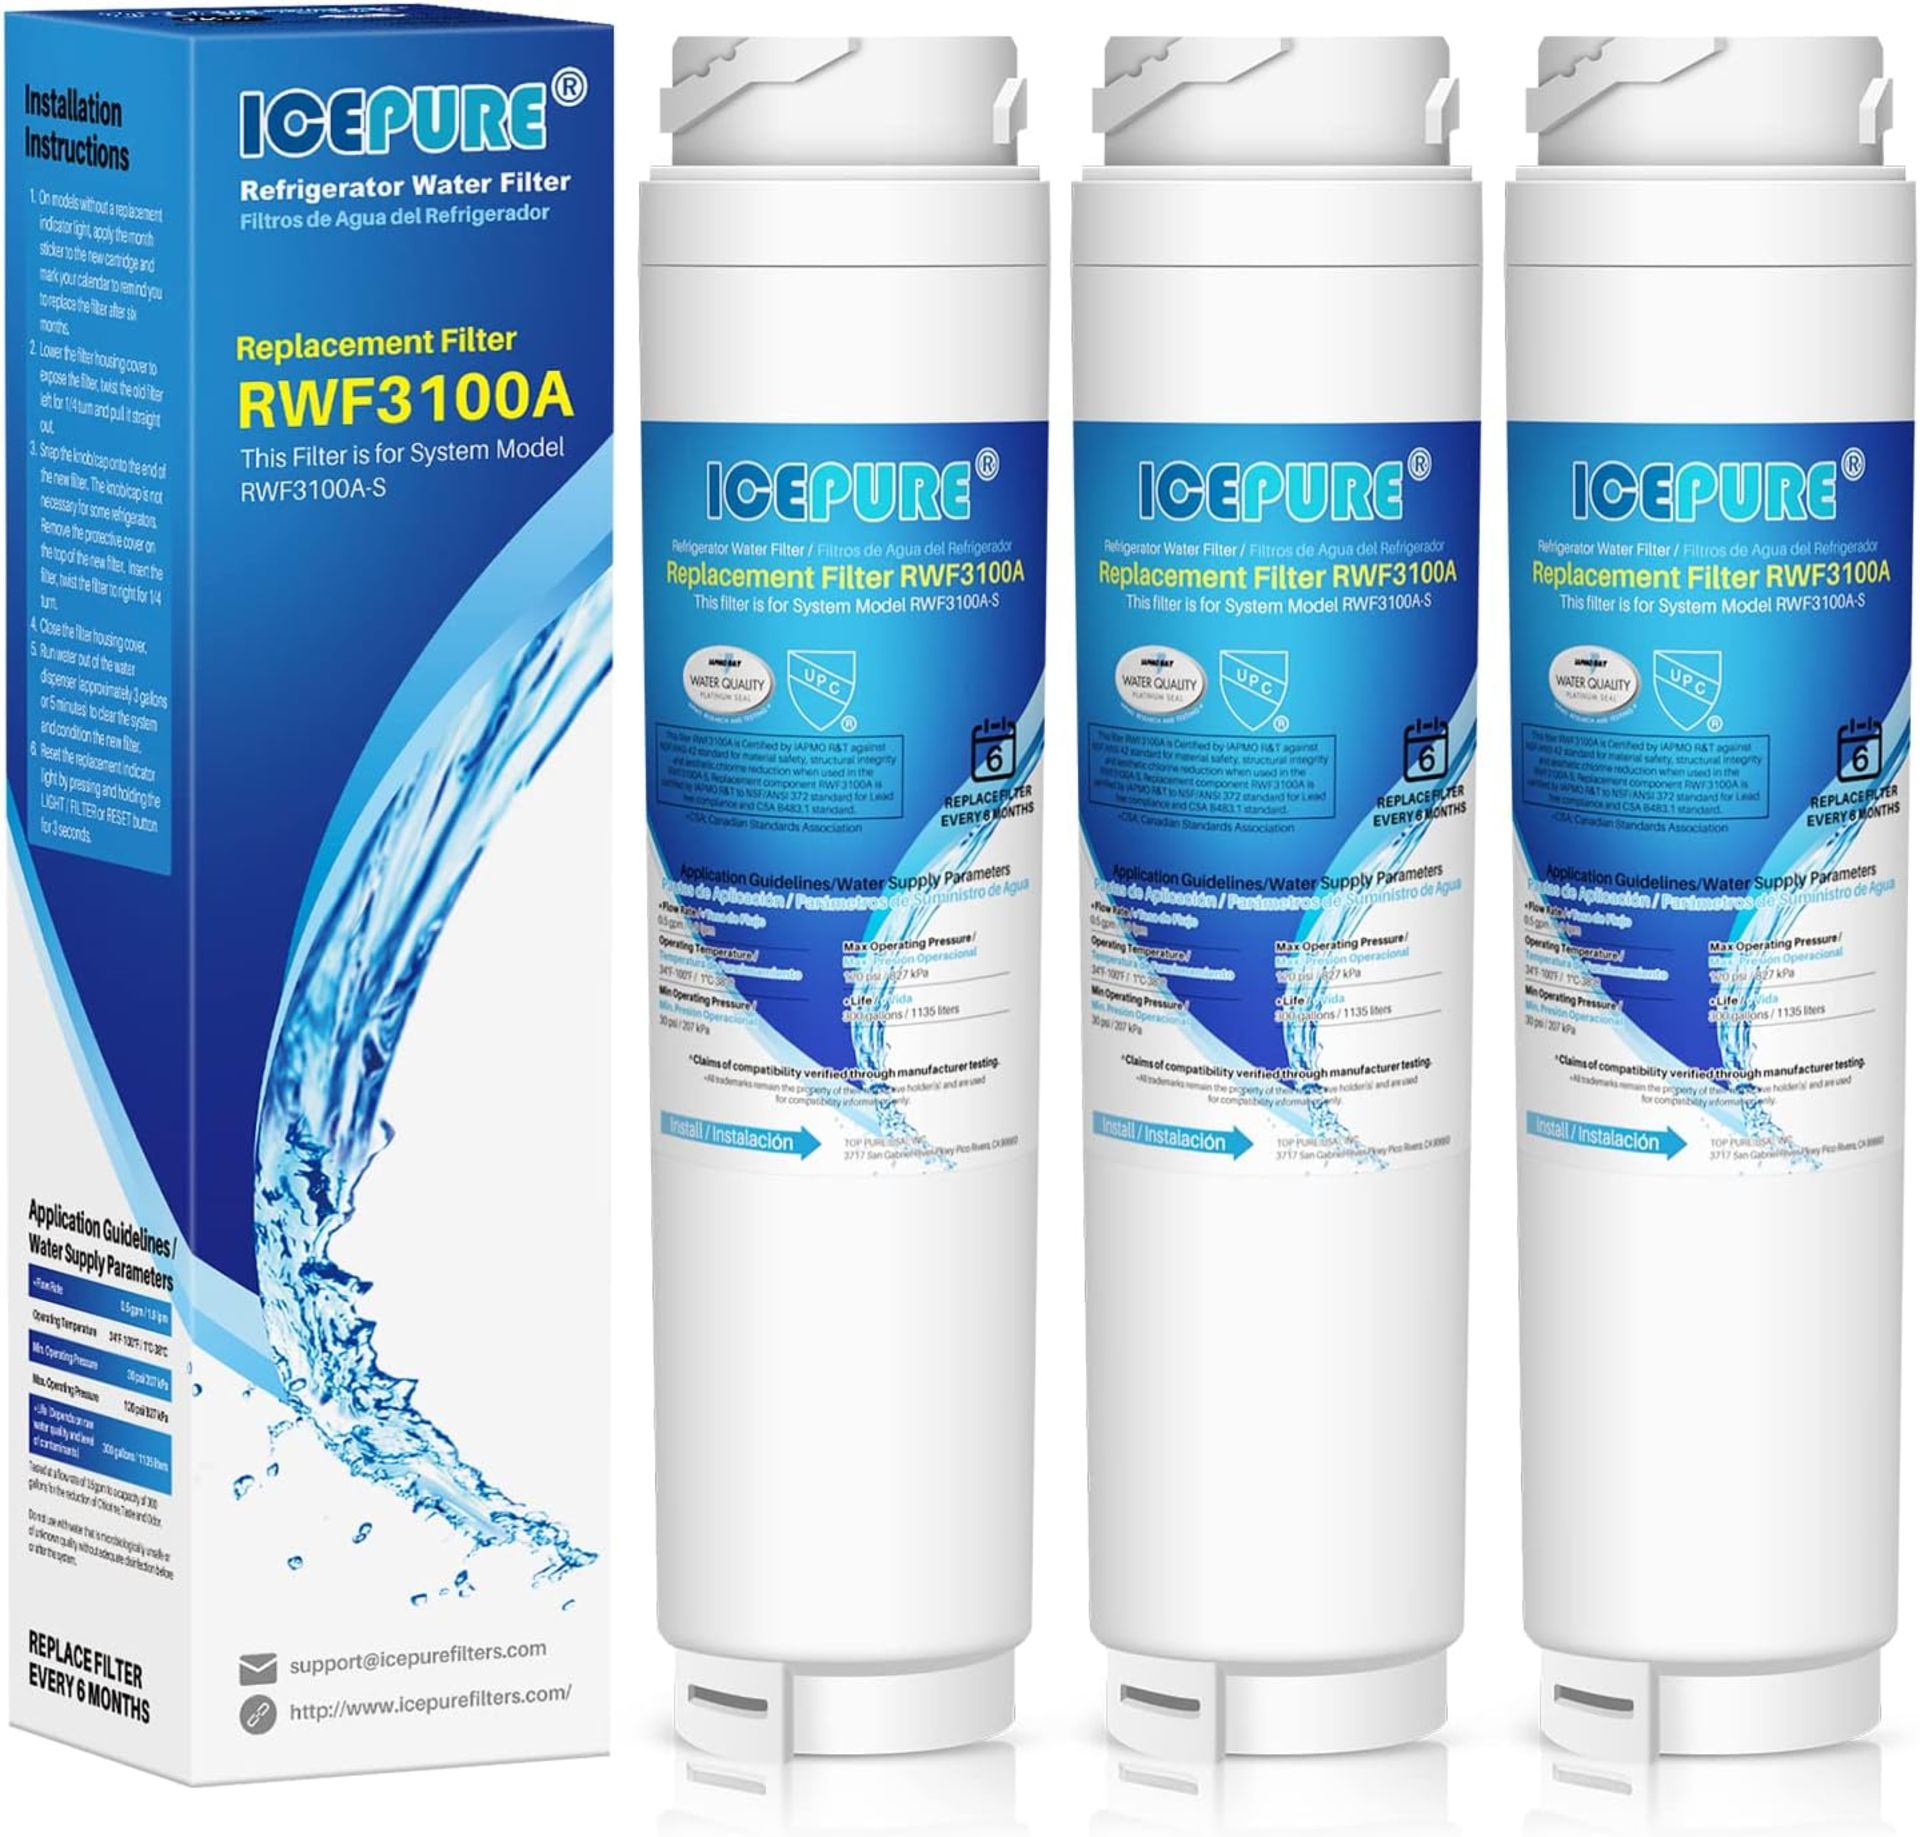 Approximate RRP £180, Collection of Filters, Water Filters, Replacement Filters, 10 Packs